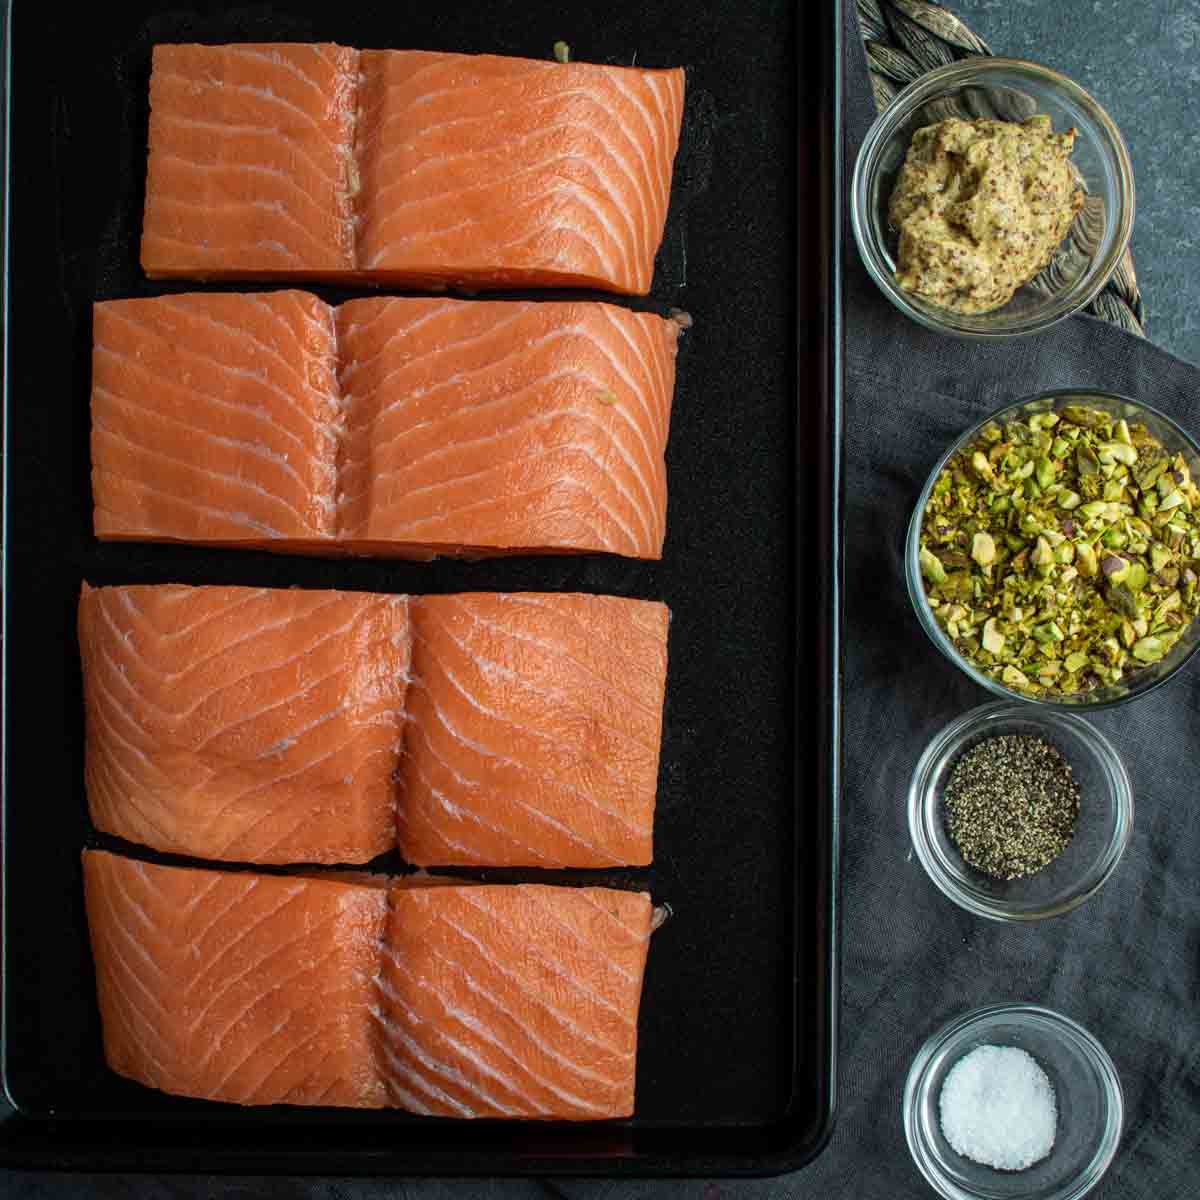 ingredients for Pistachio crusted salmon